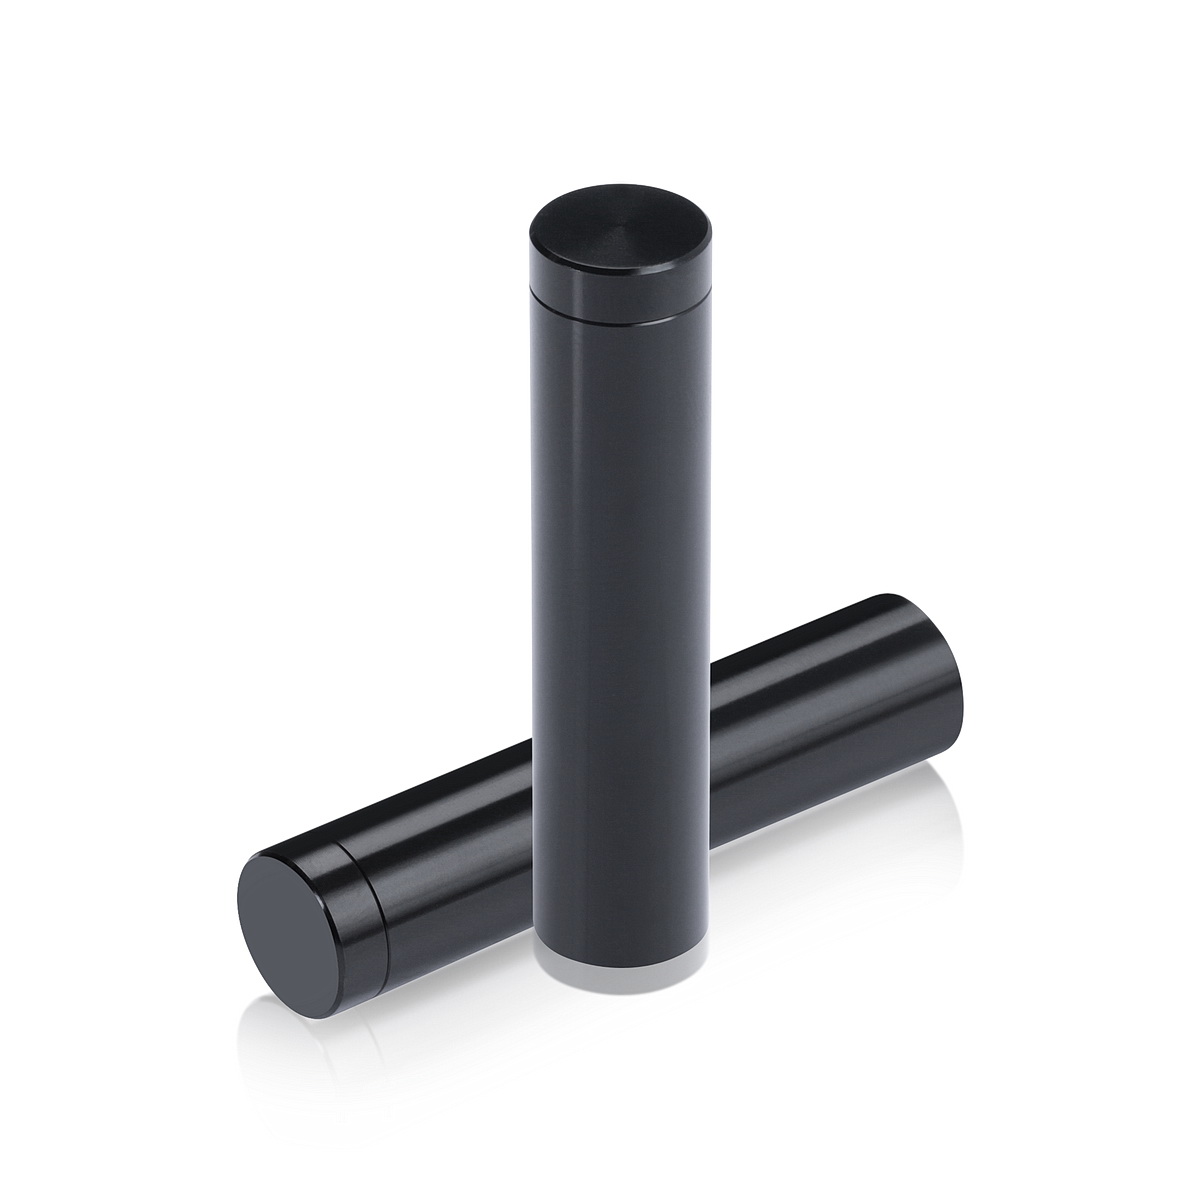 1/2'' Diameter X 2'' Barrel Length, Affordable Aluminum Standoffs, Black Anodized Finish Easy Fasten Standoff (For Inside / Outside use) [Required Material Hole Size: 3/8'']